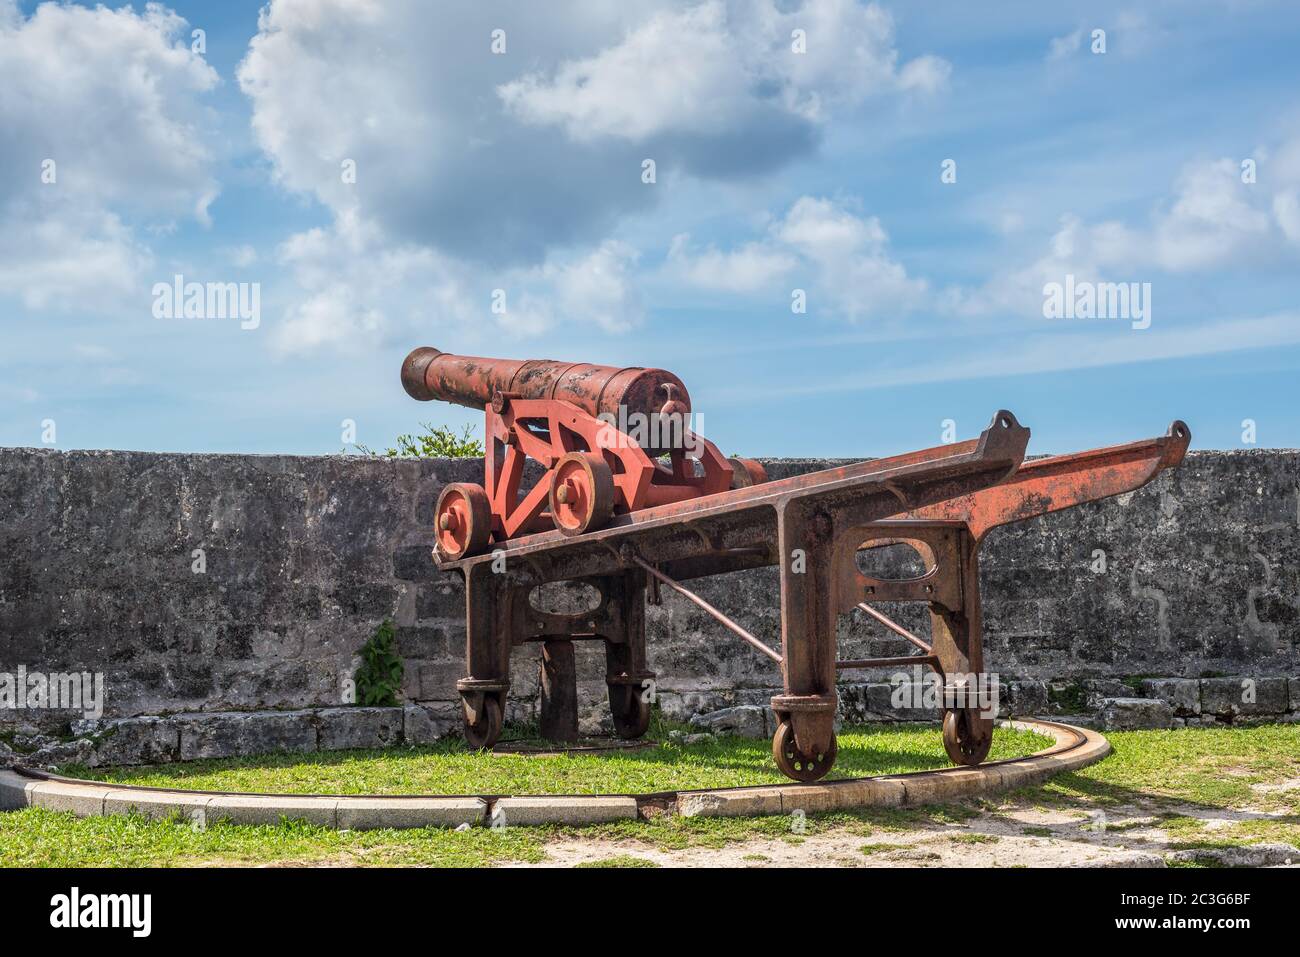 1800s Era Cannon at Fort Fincastle overlooking the harbor in Nassau, New Providence, Bahamas Stock Photo